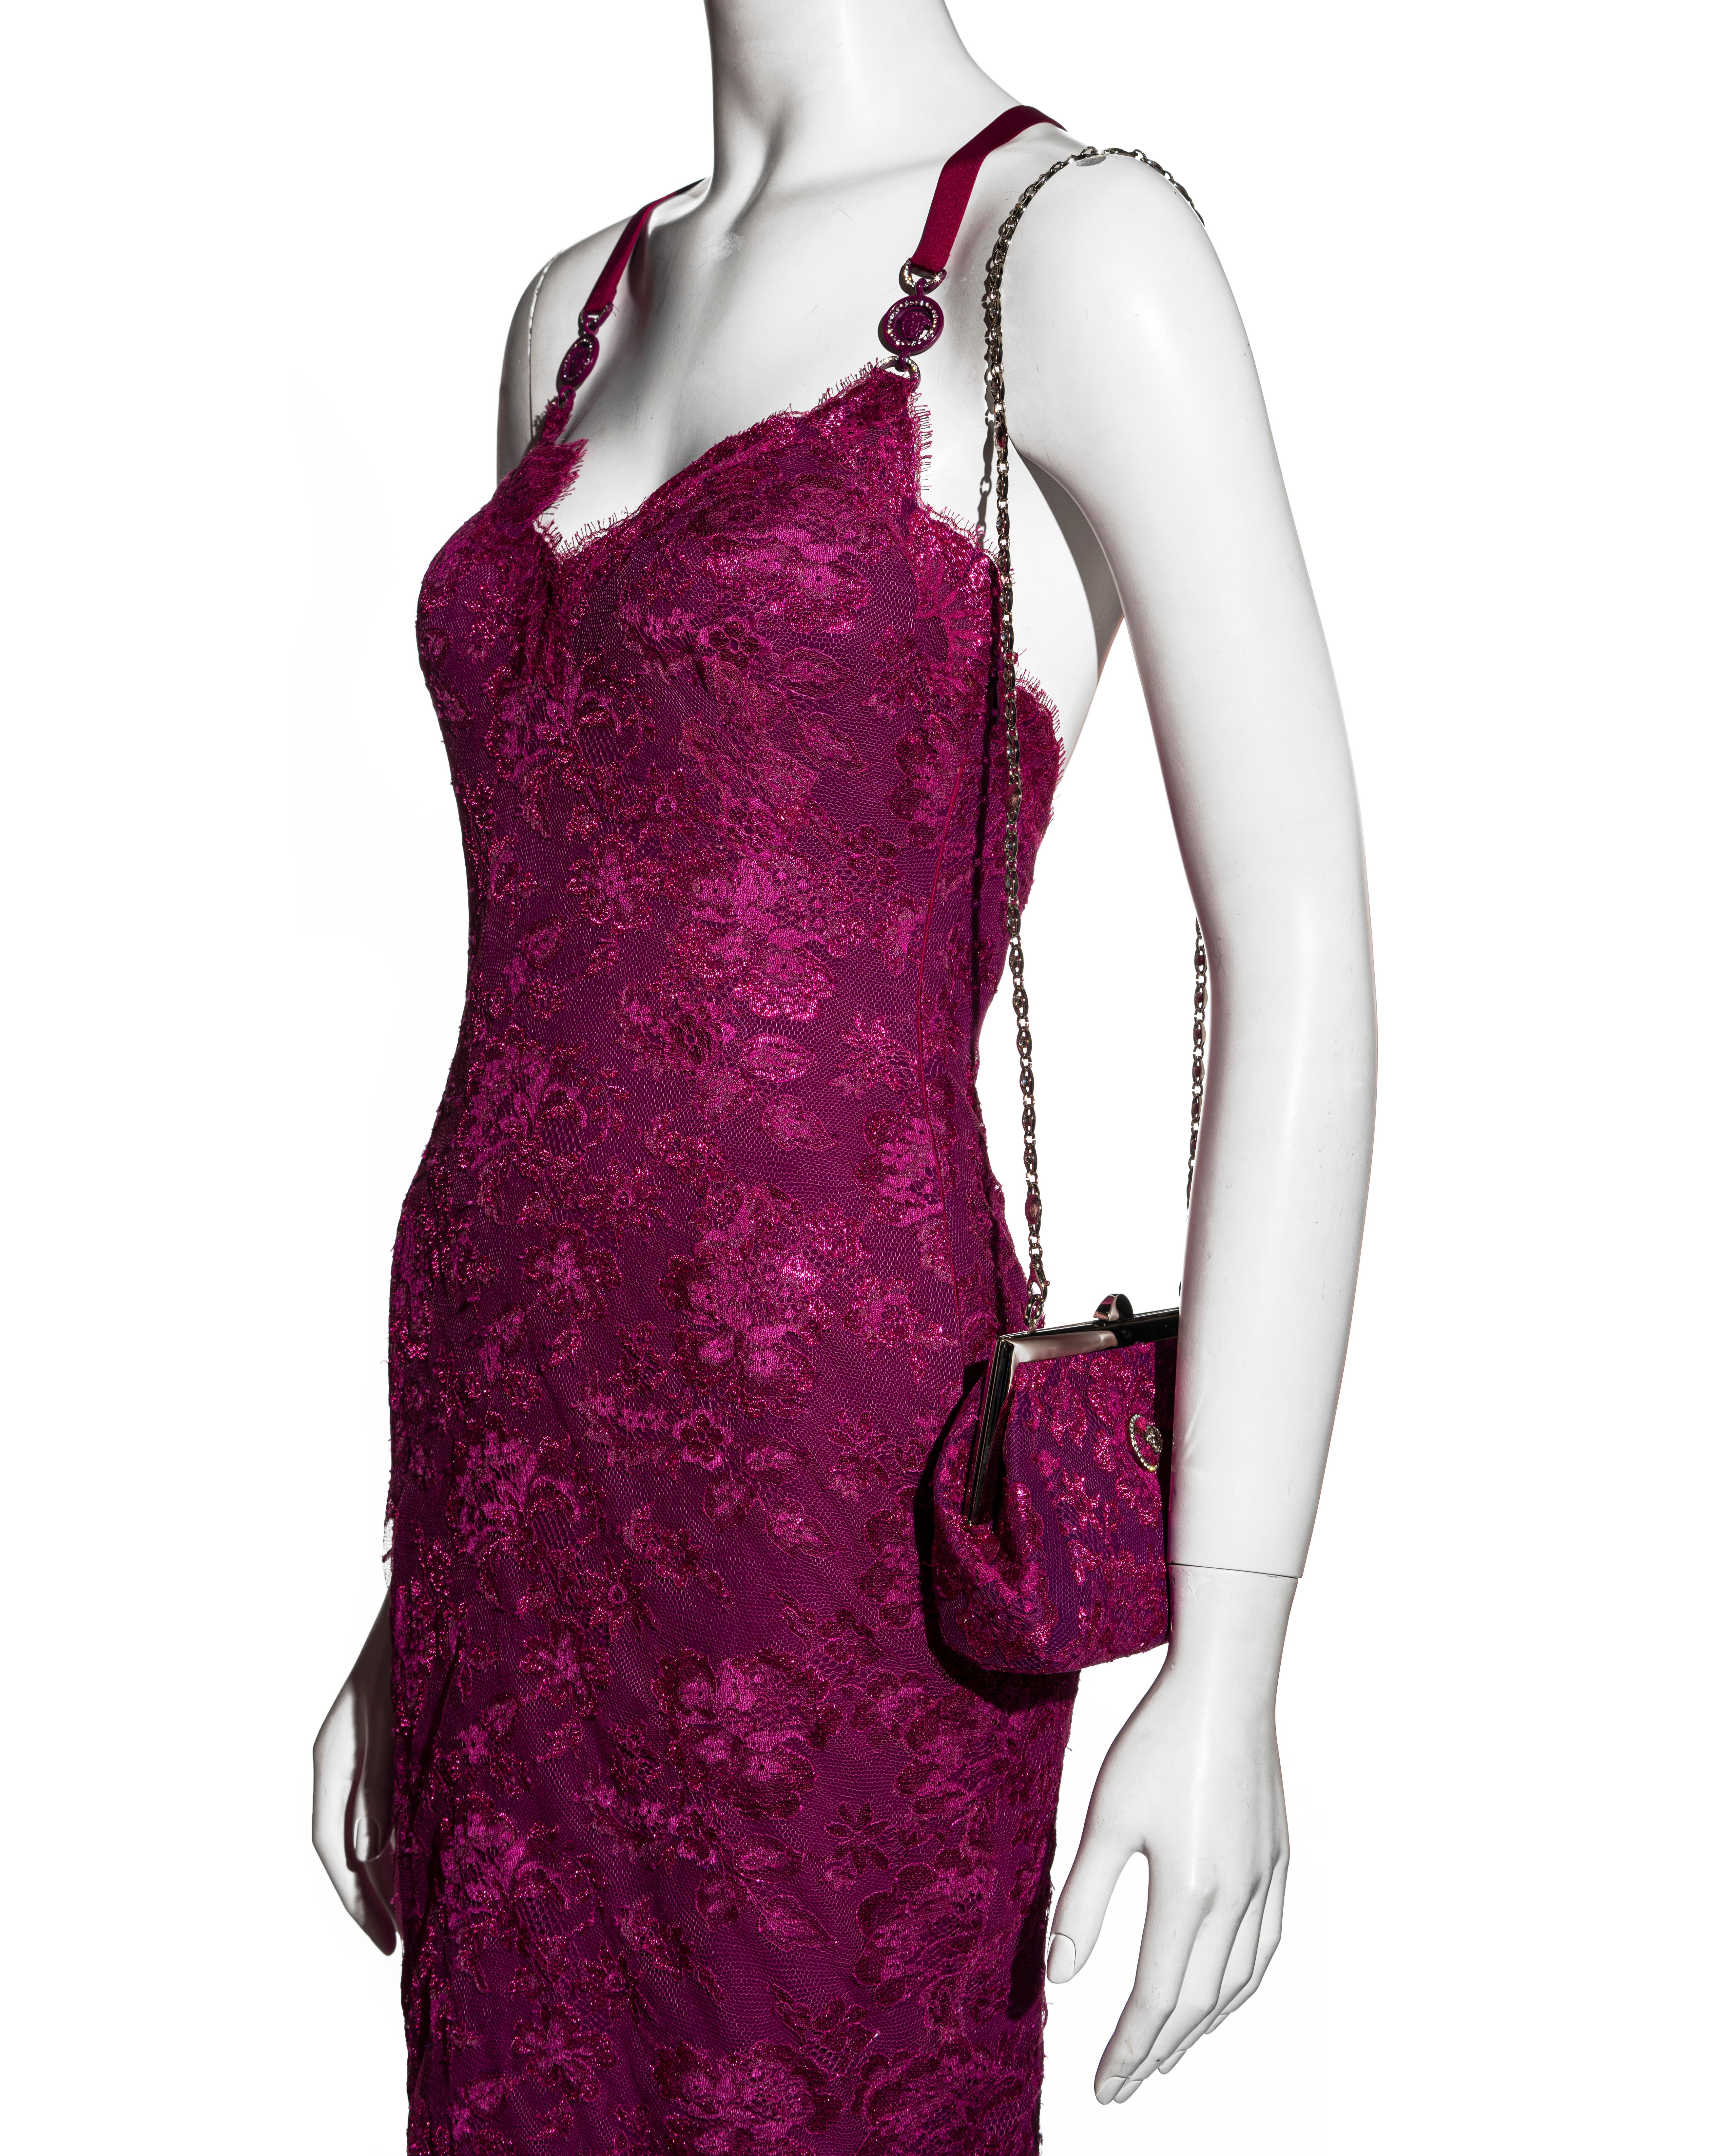 Women's Atelier Versace Haute Couture magenta pink lace evening dress and purse, ss 1996